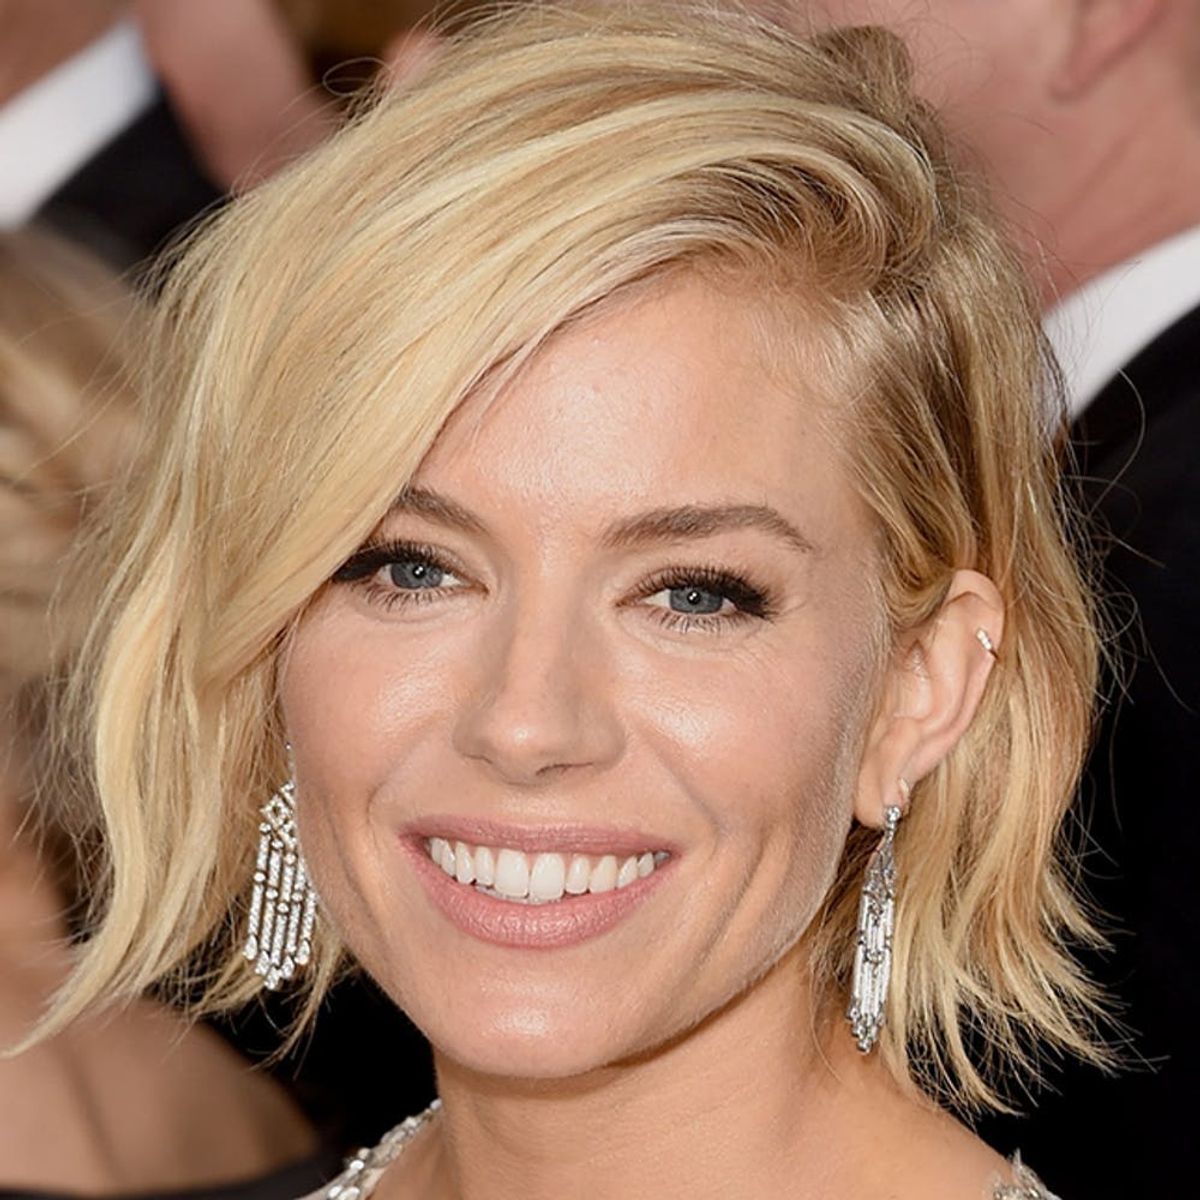 New Celeb Hair Trend: 9 Short Hairstyles from the Red Carpet